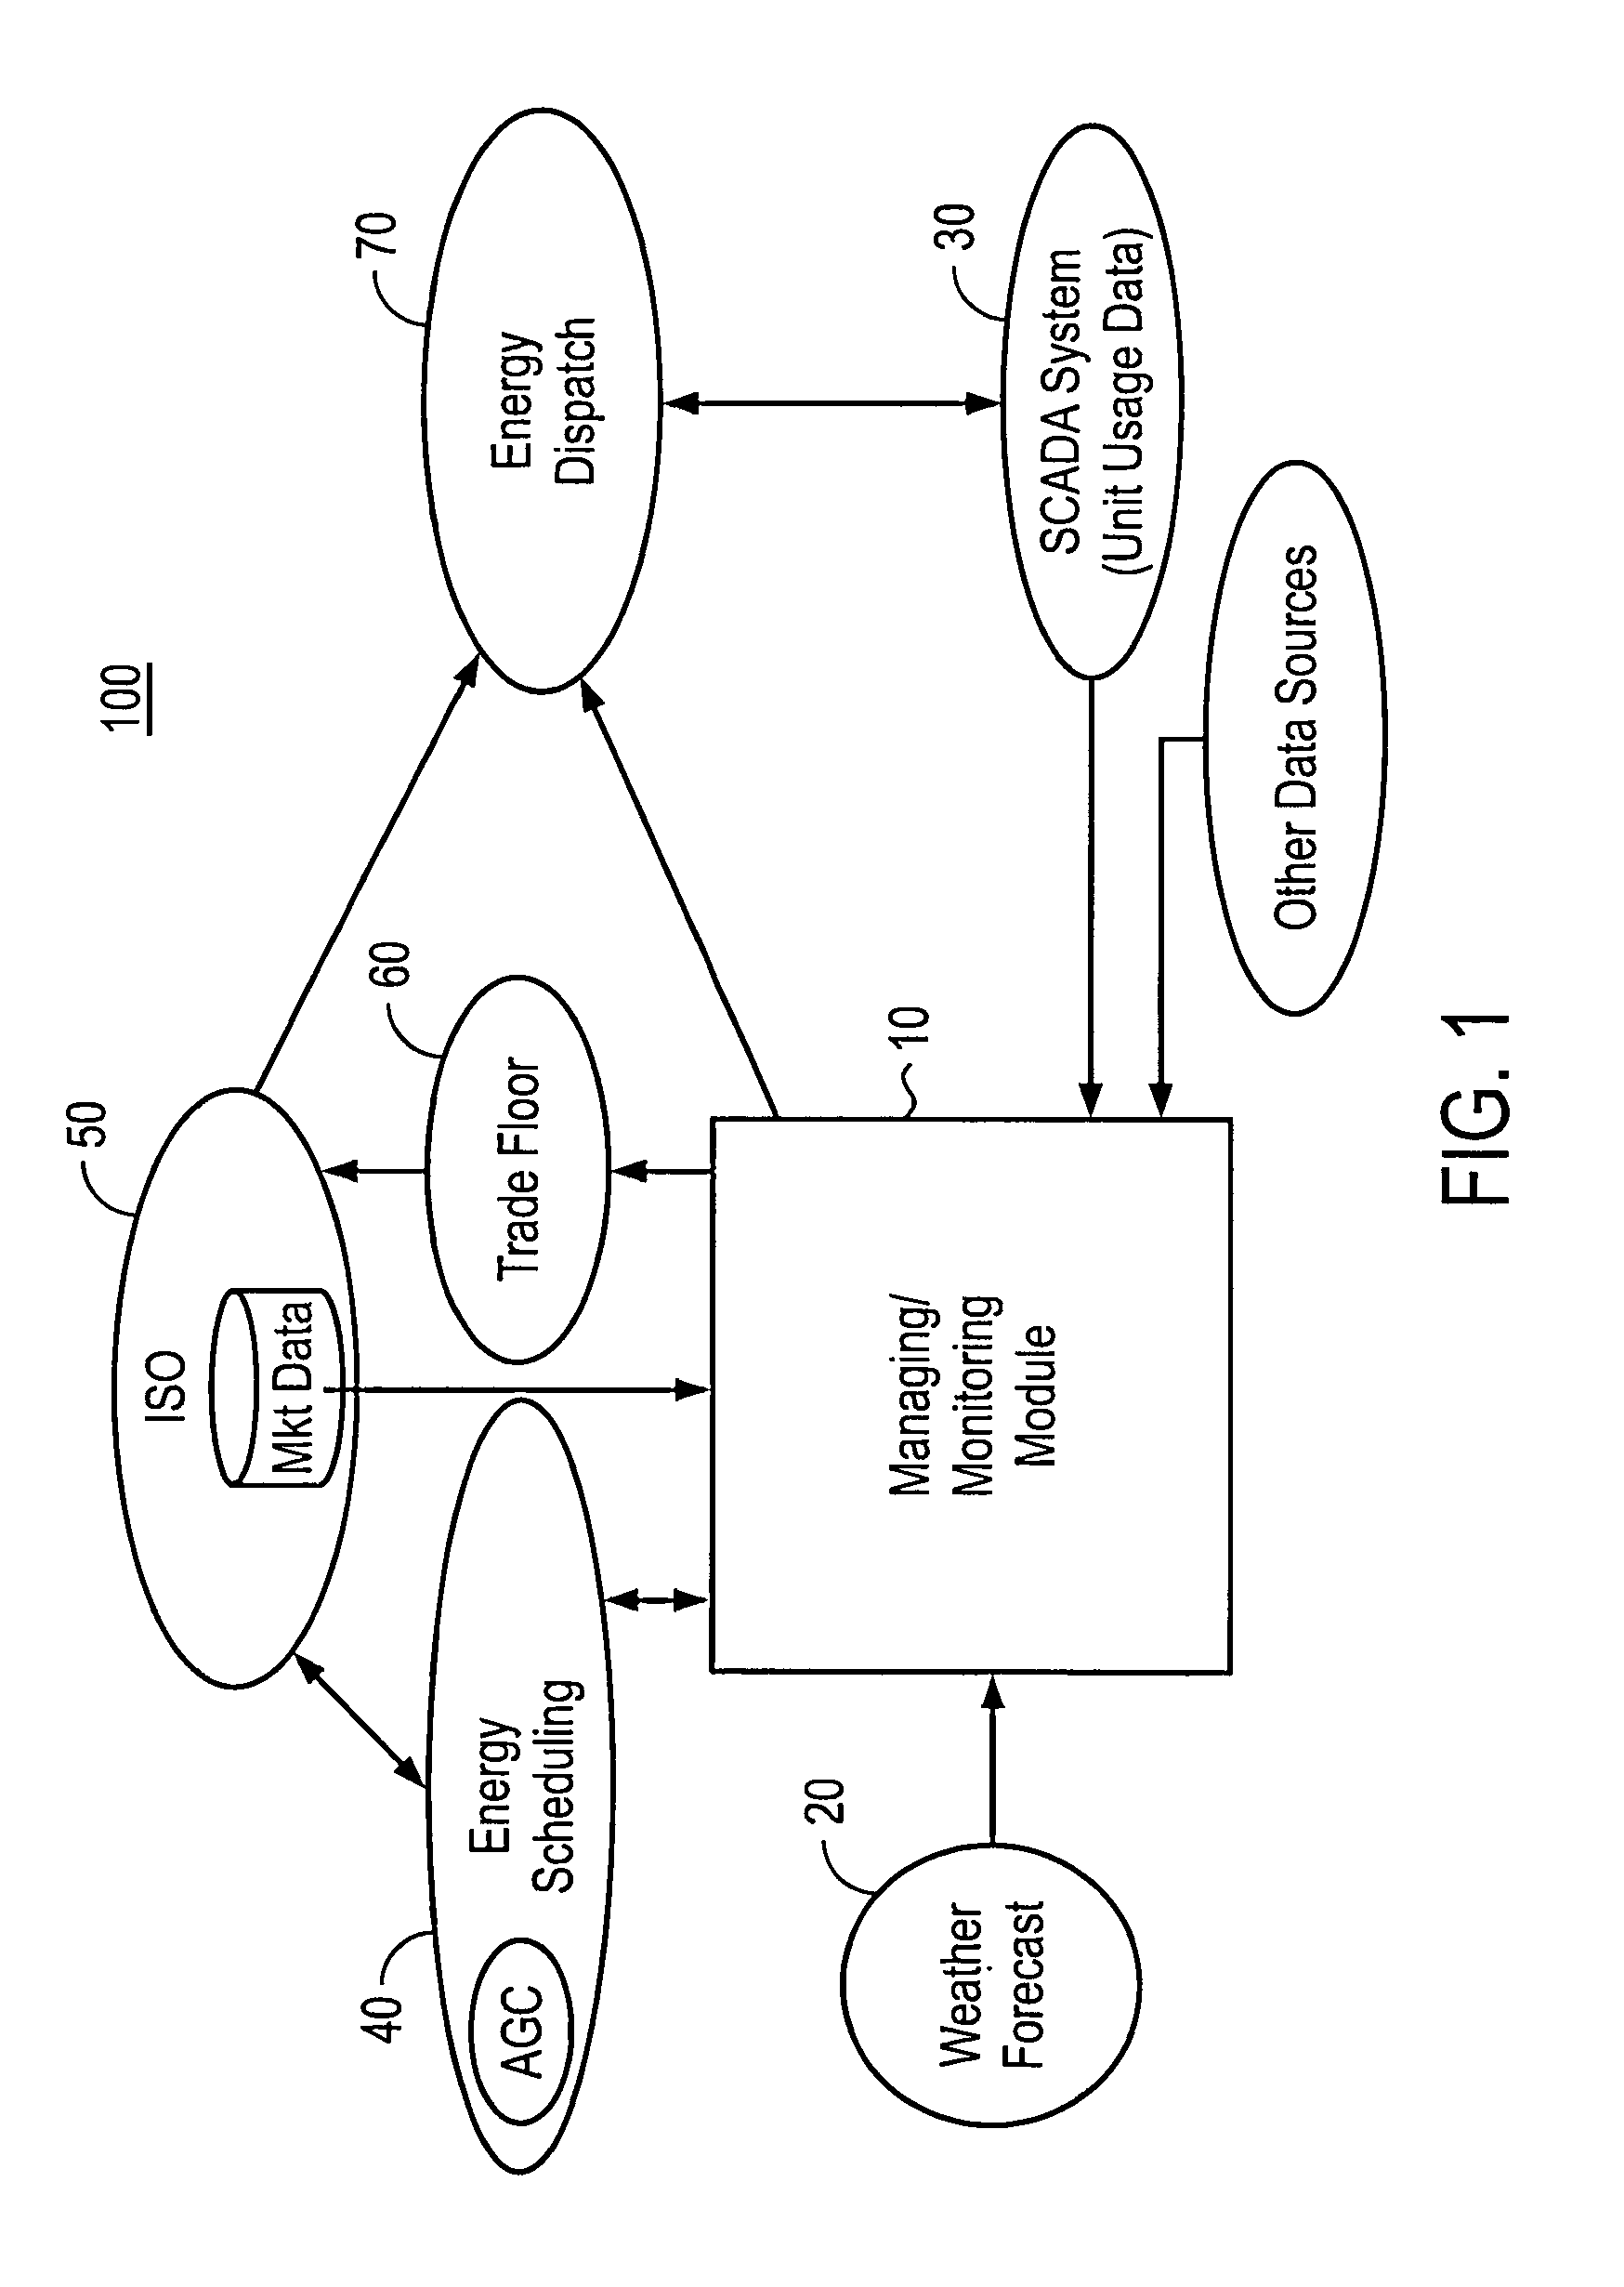 System and method for managing and monitoring renewable energy power generation